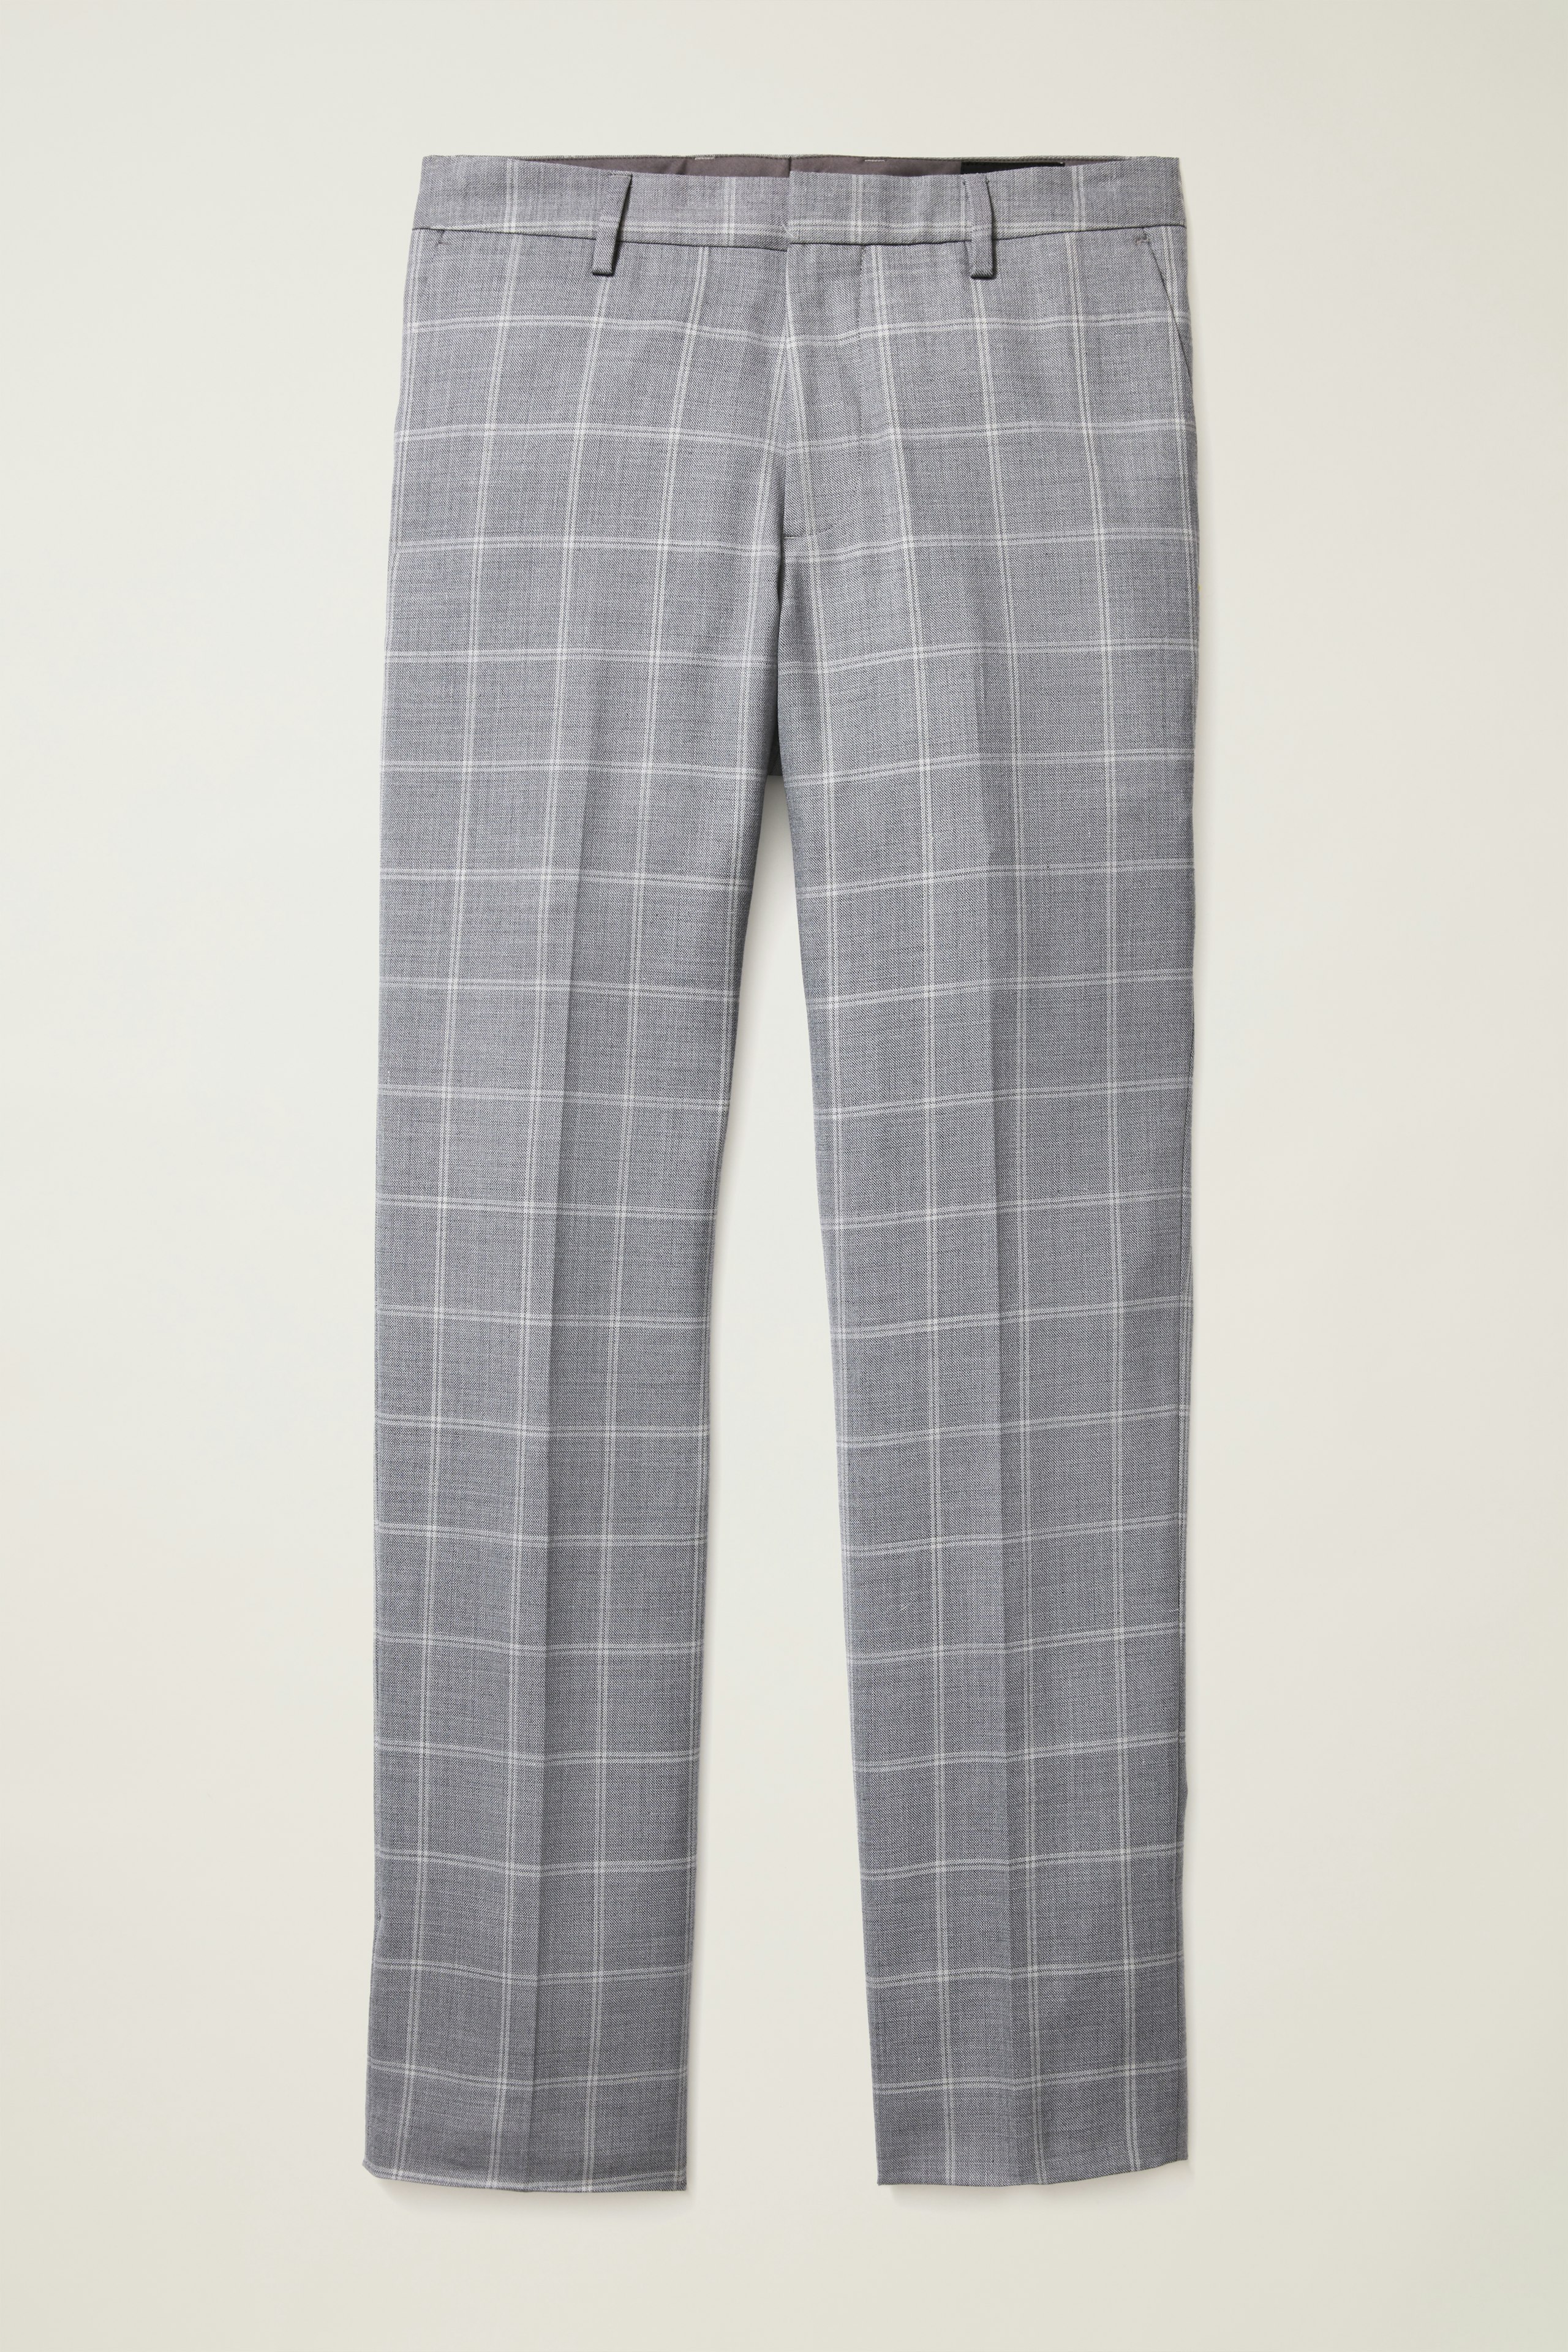 Jetsetter Stretch Wool Suit Pant Extended Sizes